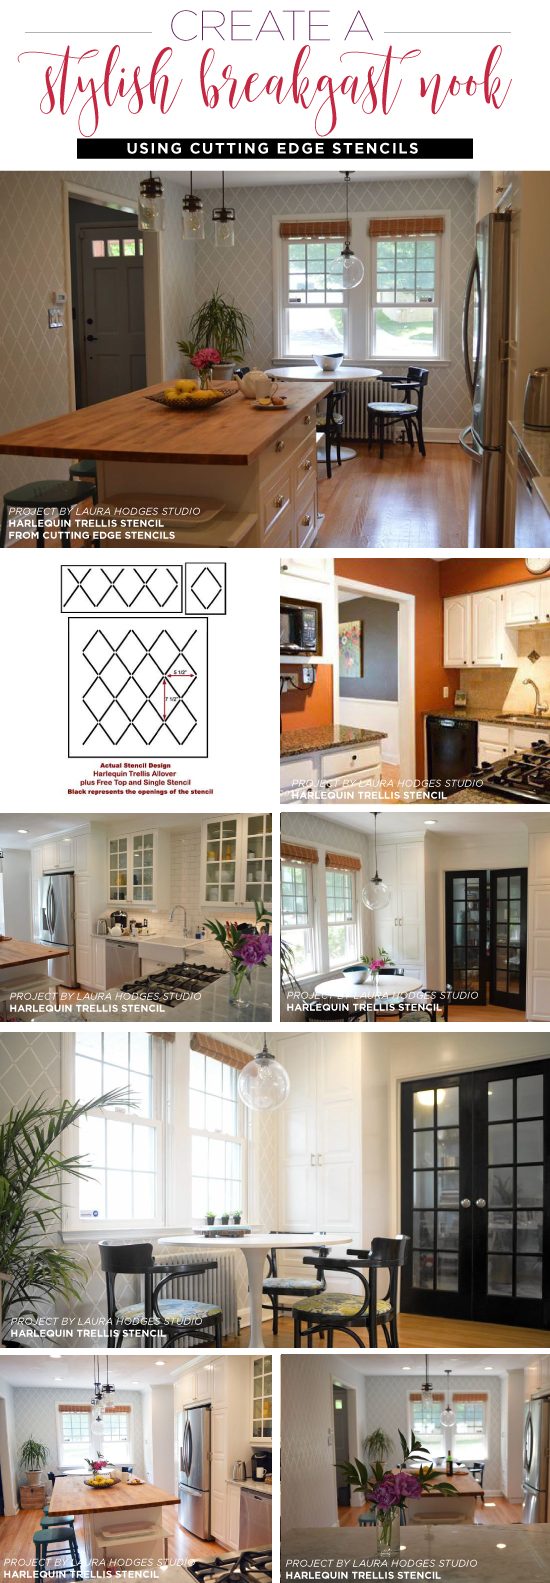 Cutting Edge Stencils shares how to add personal style and fun decor to your kitchen and adjoining eating area using a stencil pattern. http://www.cuttingedgestencils.com/trellis-stencil-harlequin.html